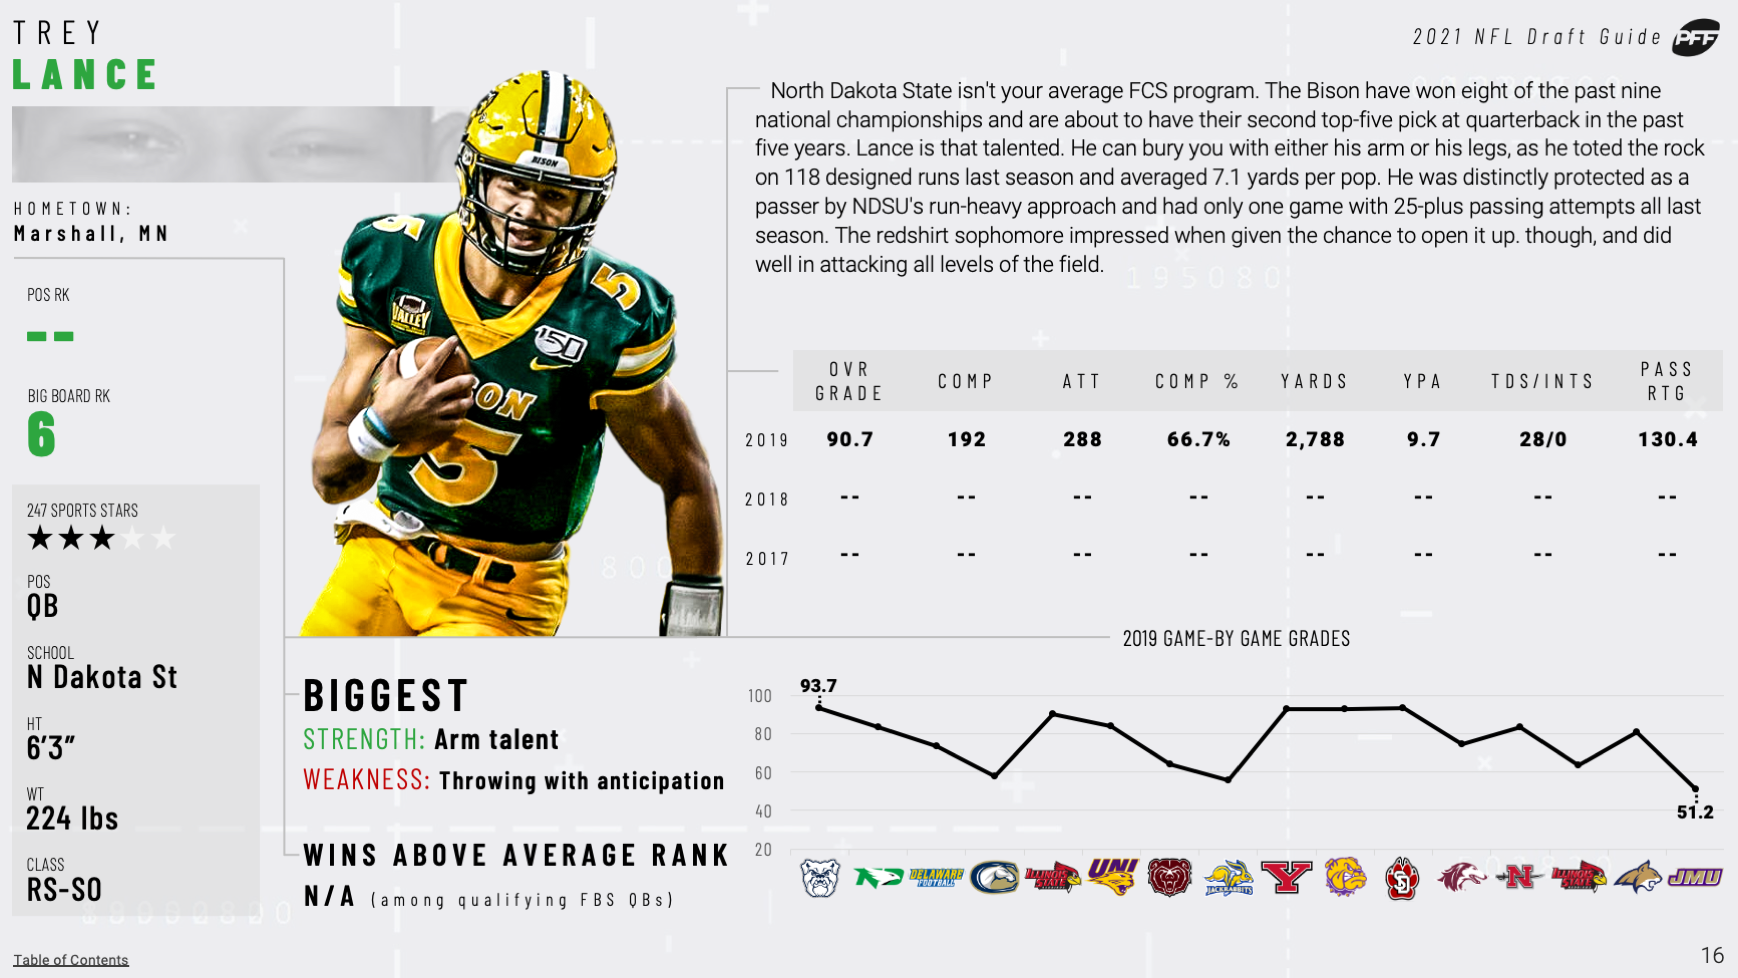 Pff S Preseason 2021 Nfl Mock Draft Trevor Lawrence Lands In Jacksonville At No 1 Overall Justin Fields Goes No 2 To Washington Football Team Nfl News Rankings And Statistics Pff